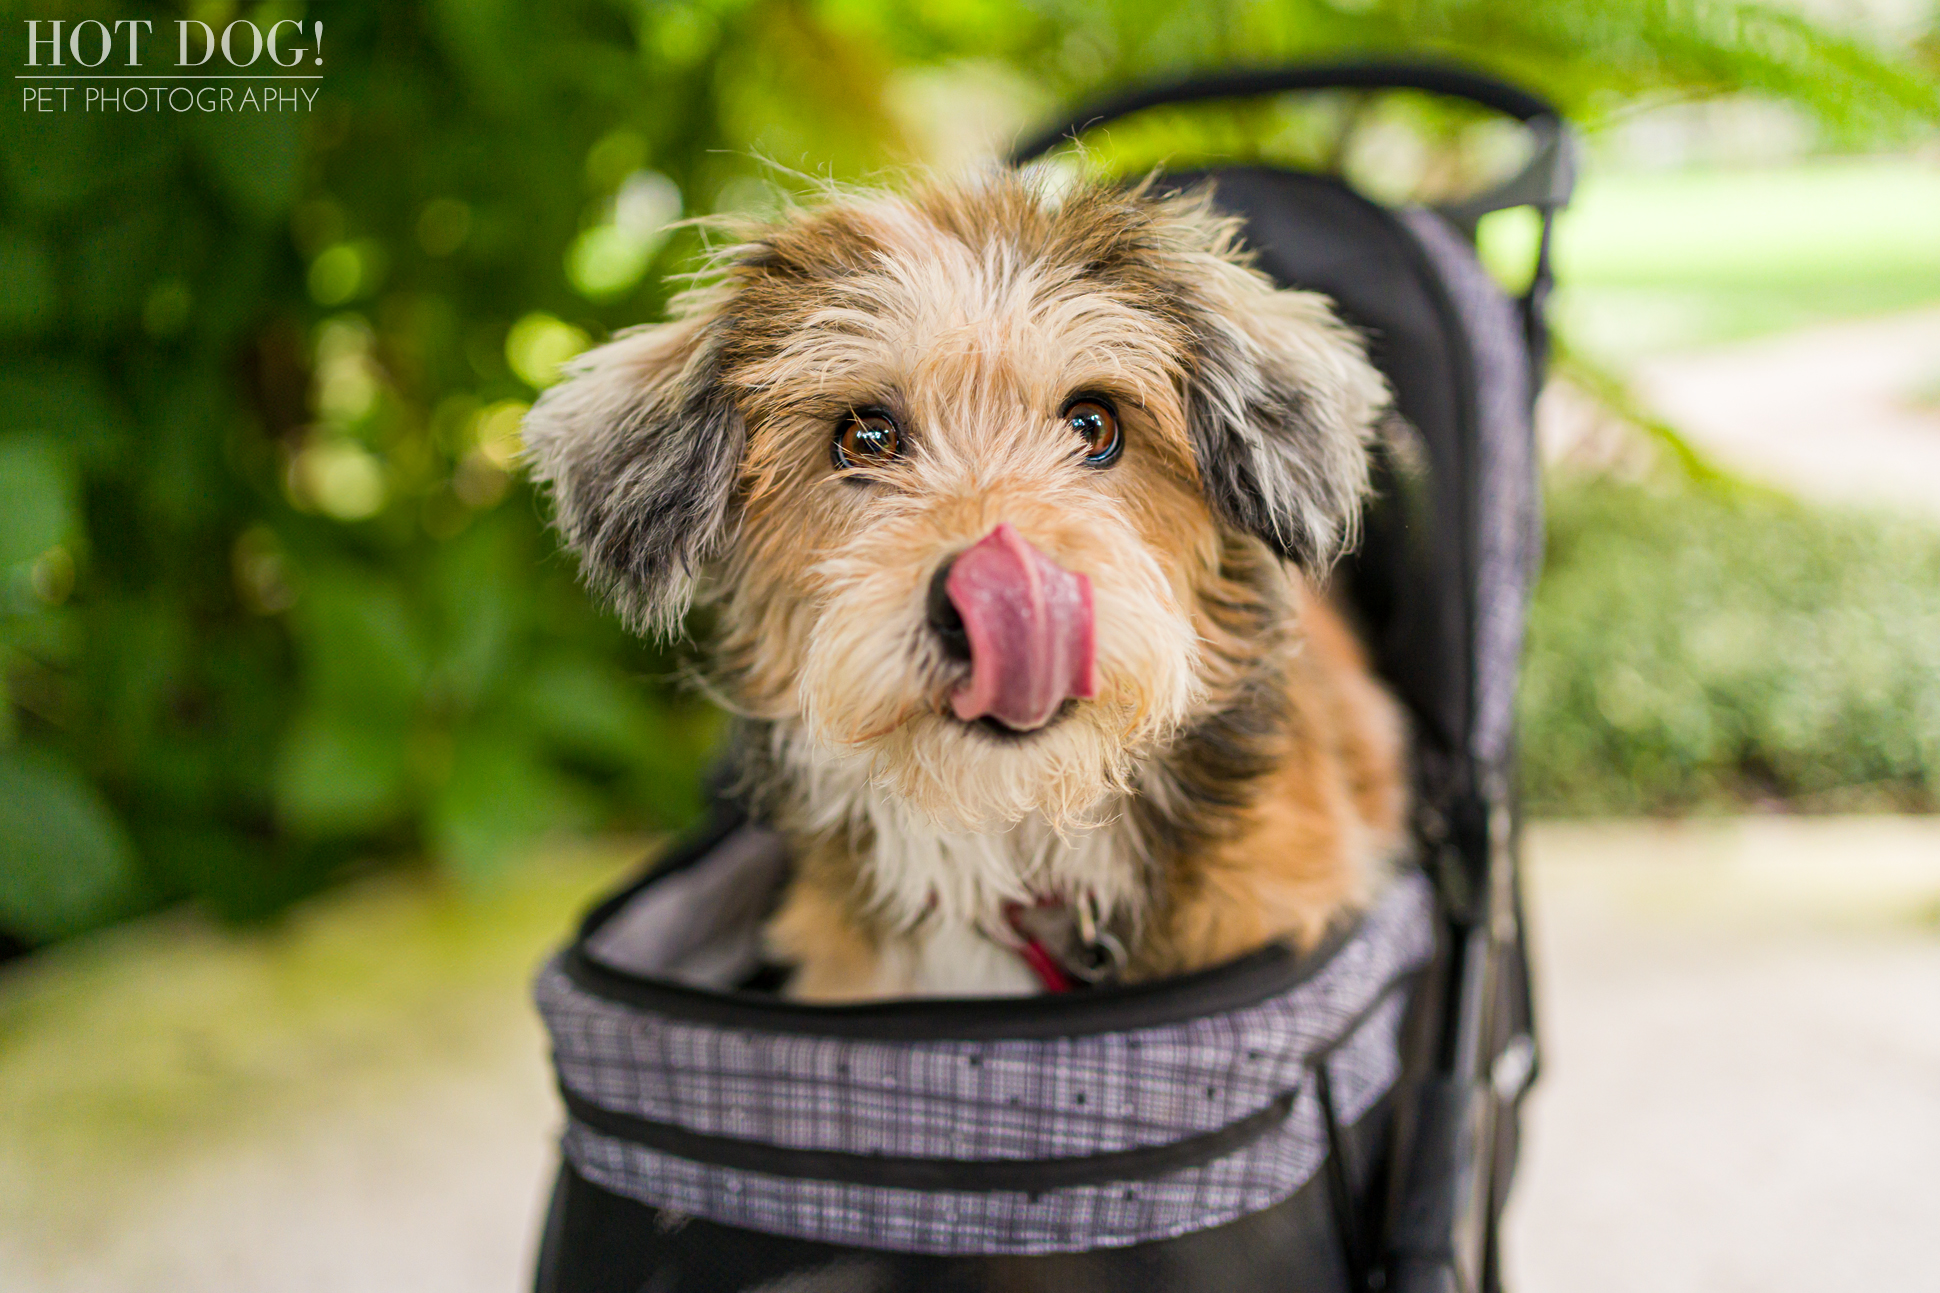 Adorable terrier mix named Otto posing for a professional pet photo session with Hot Dog! Pet Photography.